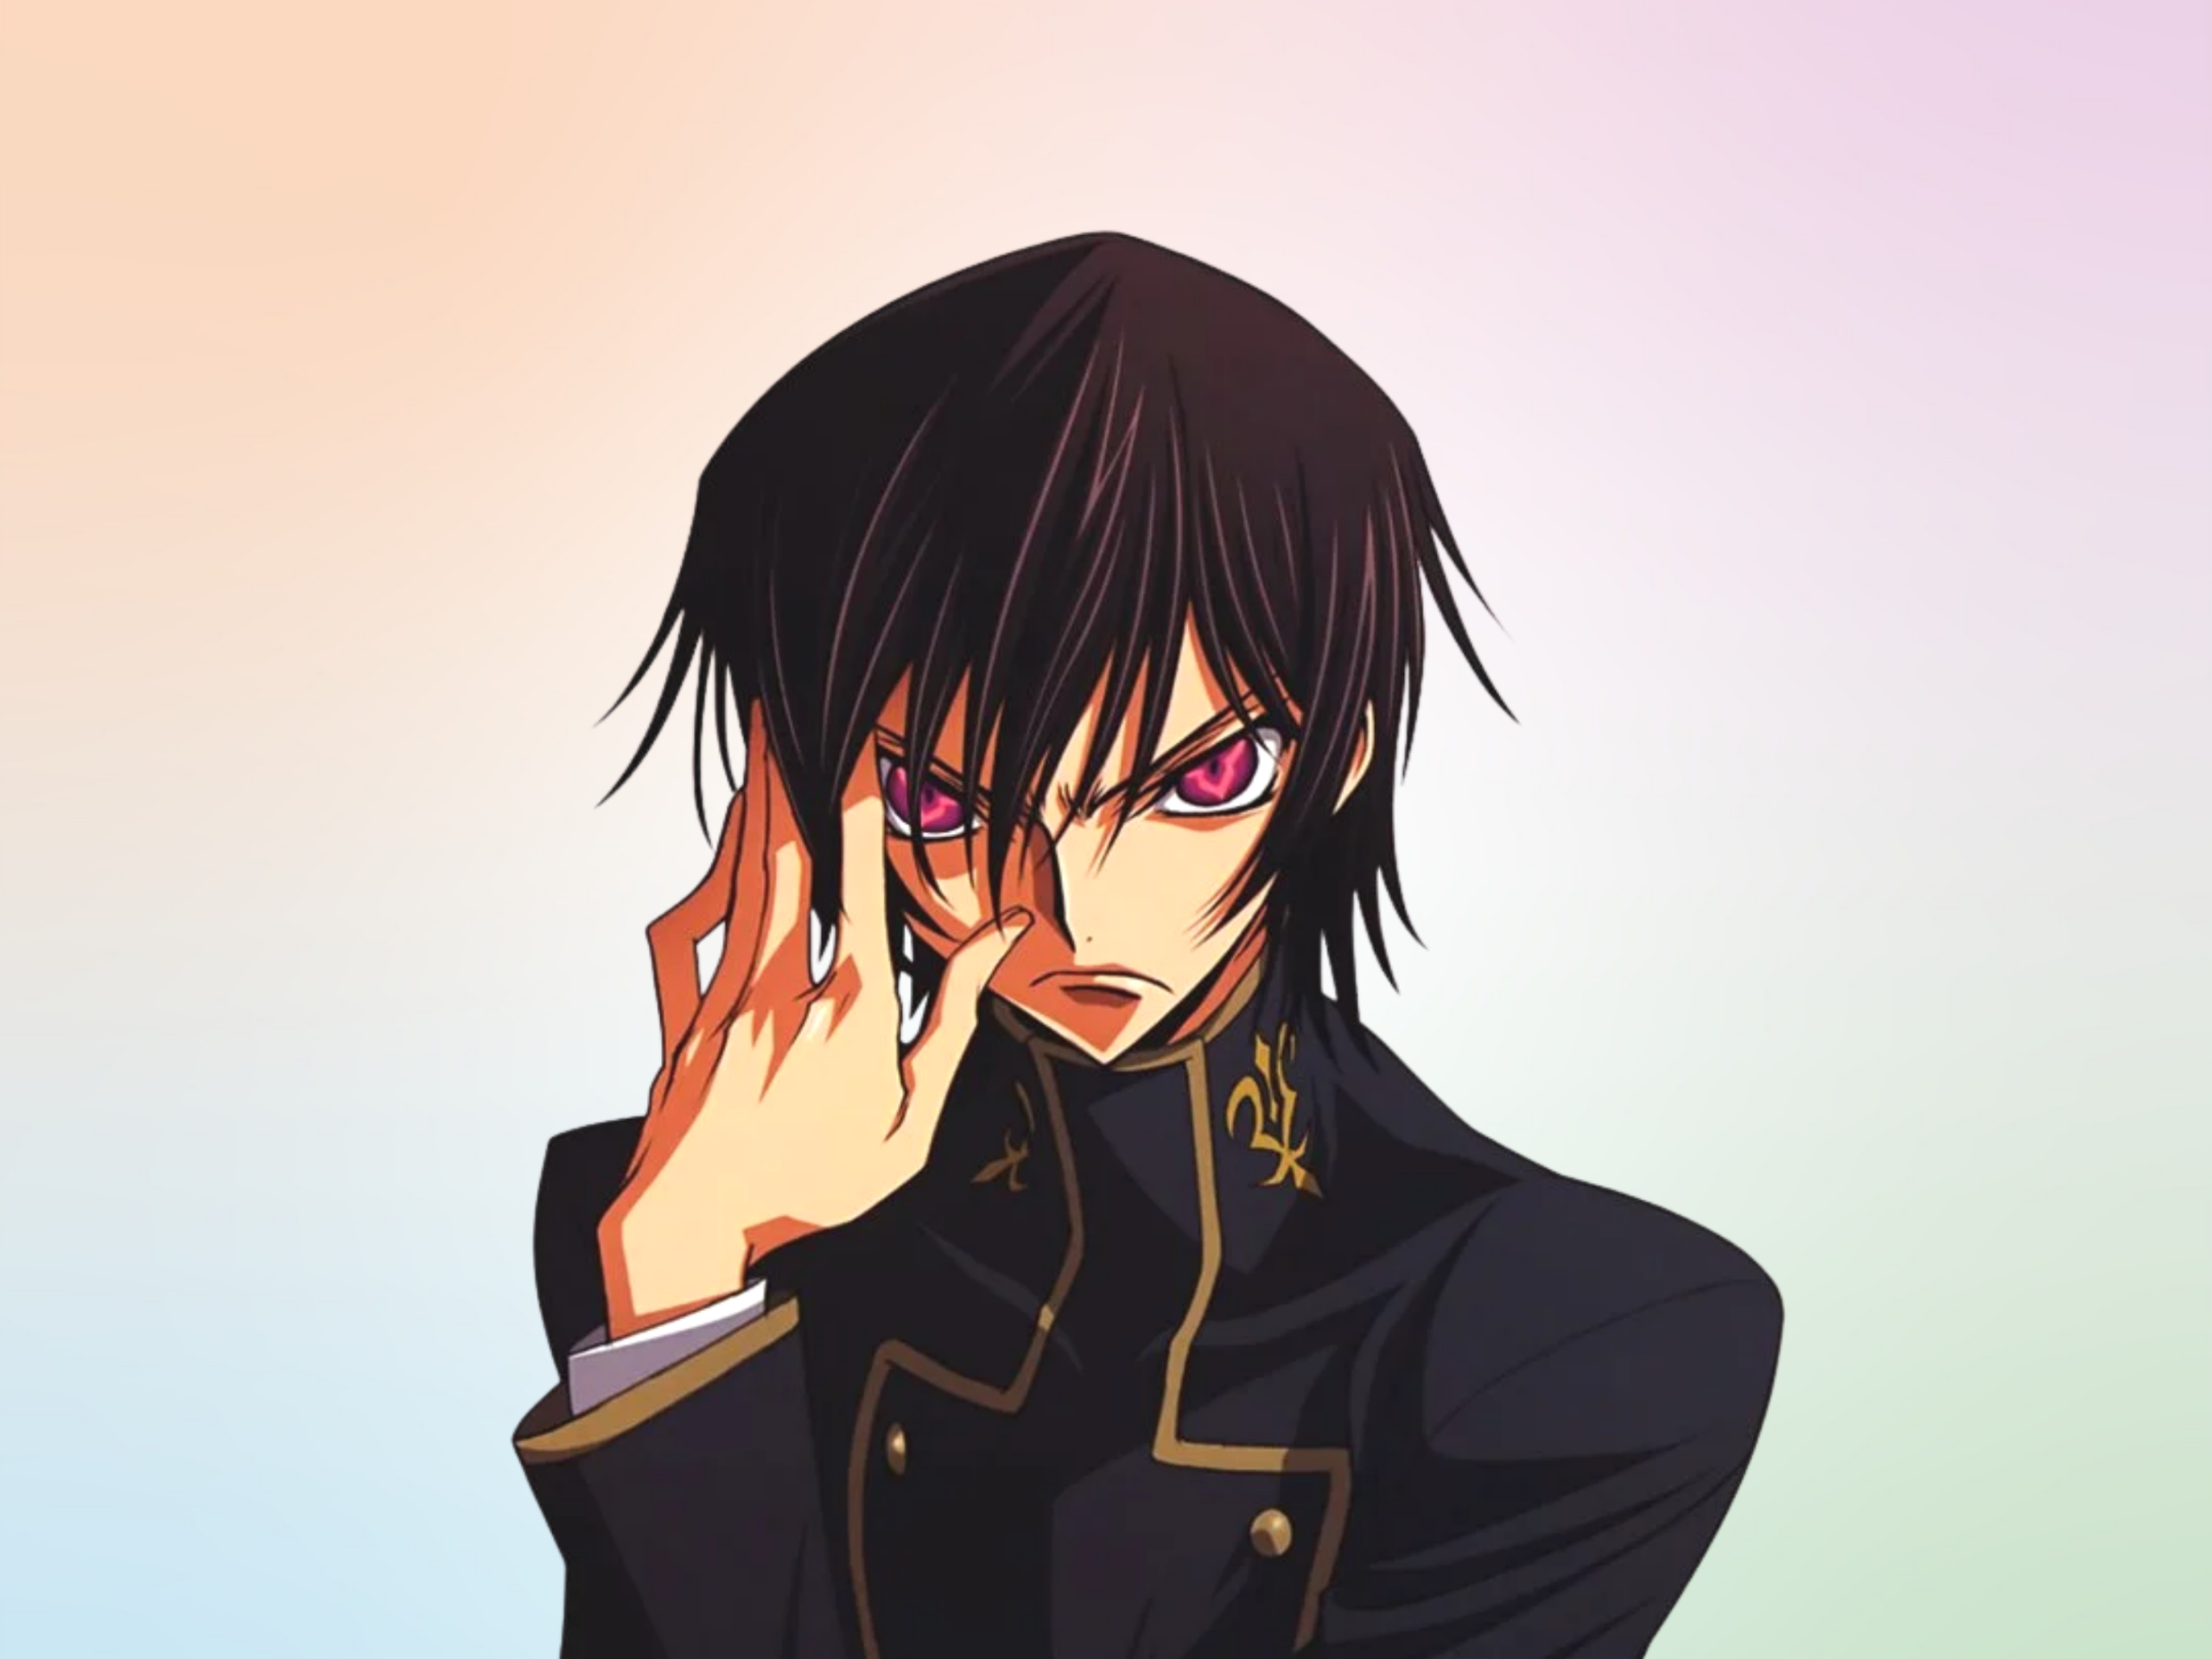 MBTI typings from someone with too much free time — Lelouch vi Britannia/Lelouch  Lamperouge